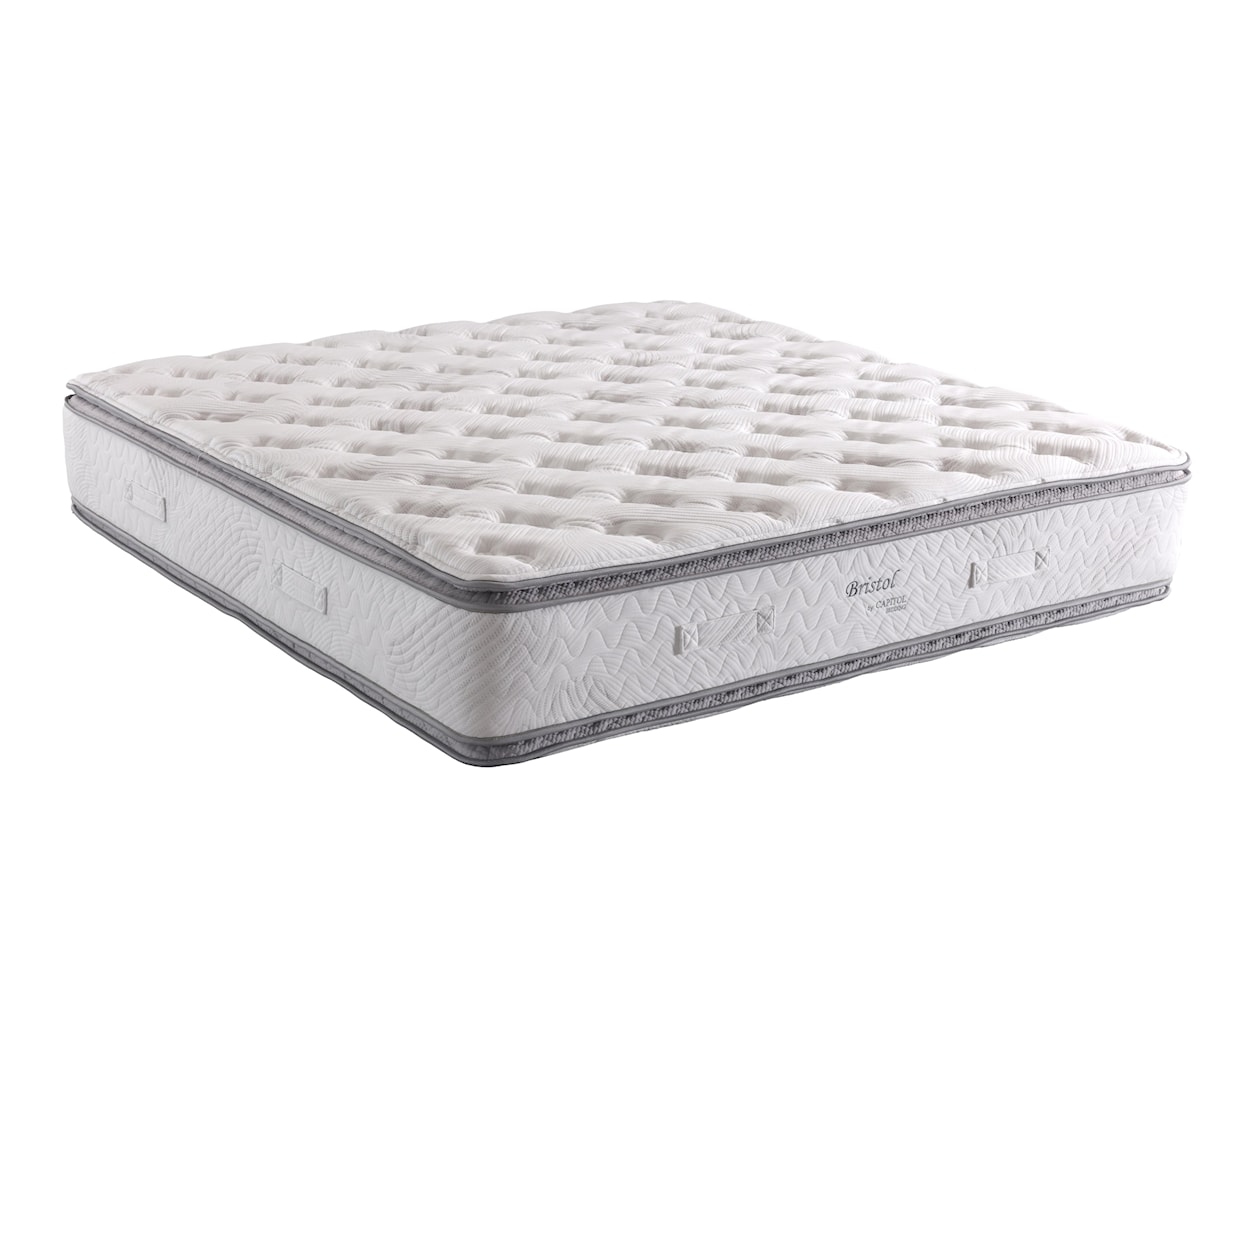 Capitol Bedding Bristol King Two Sided Pillow Top Mattress